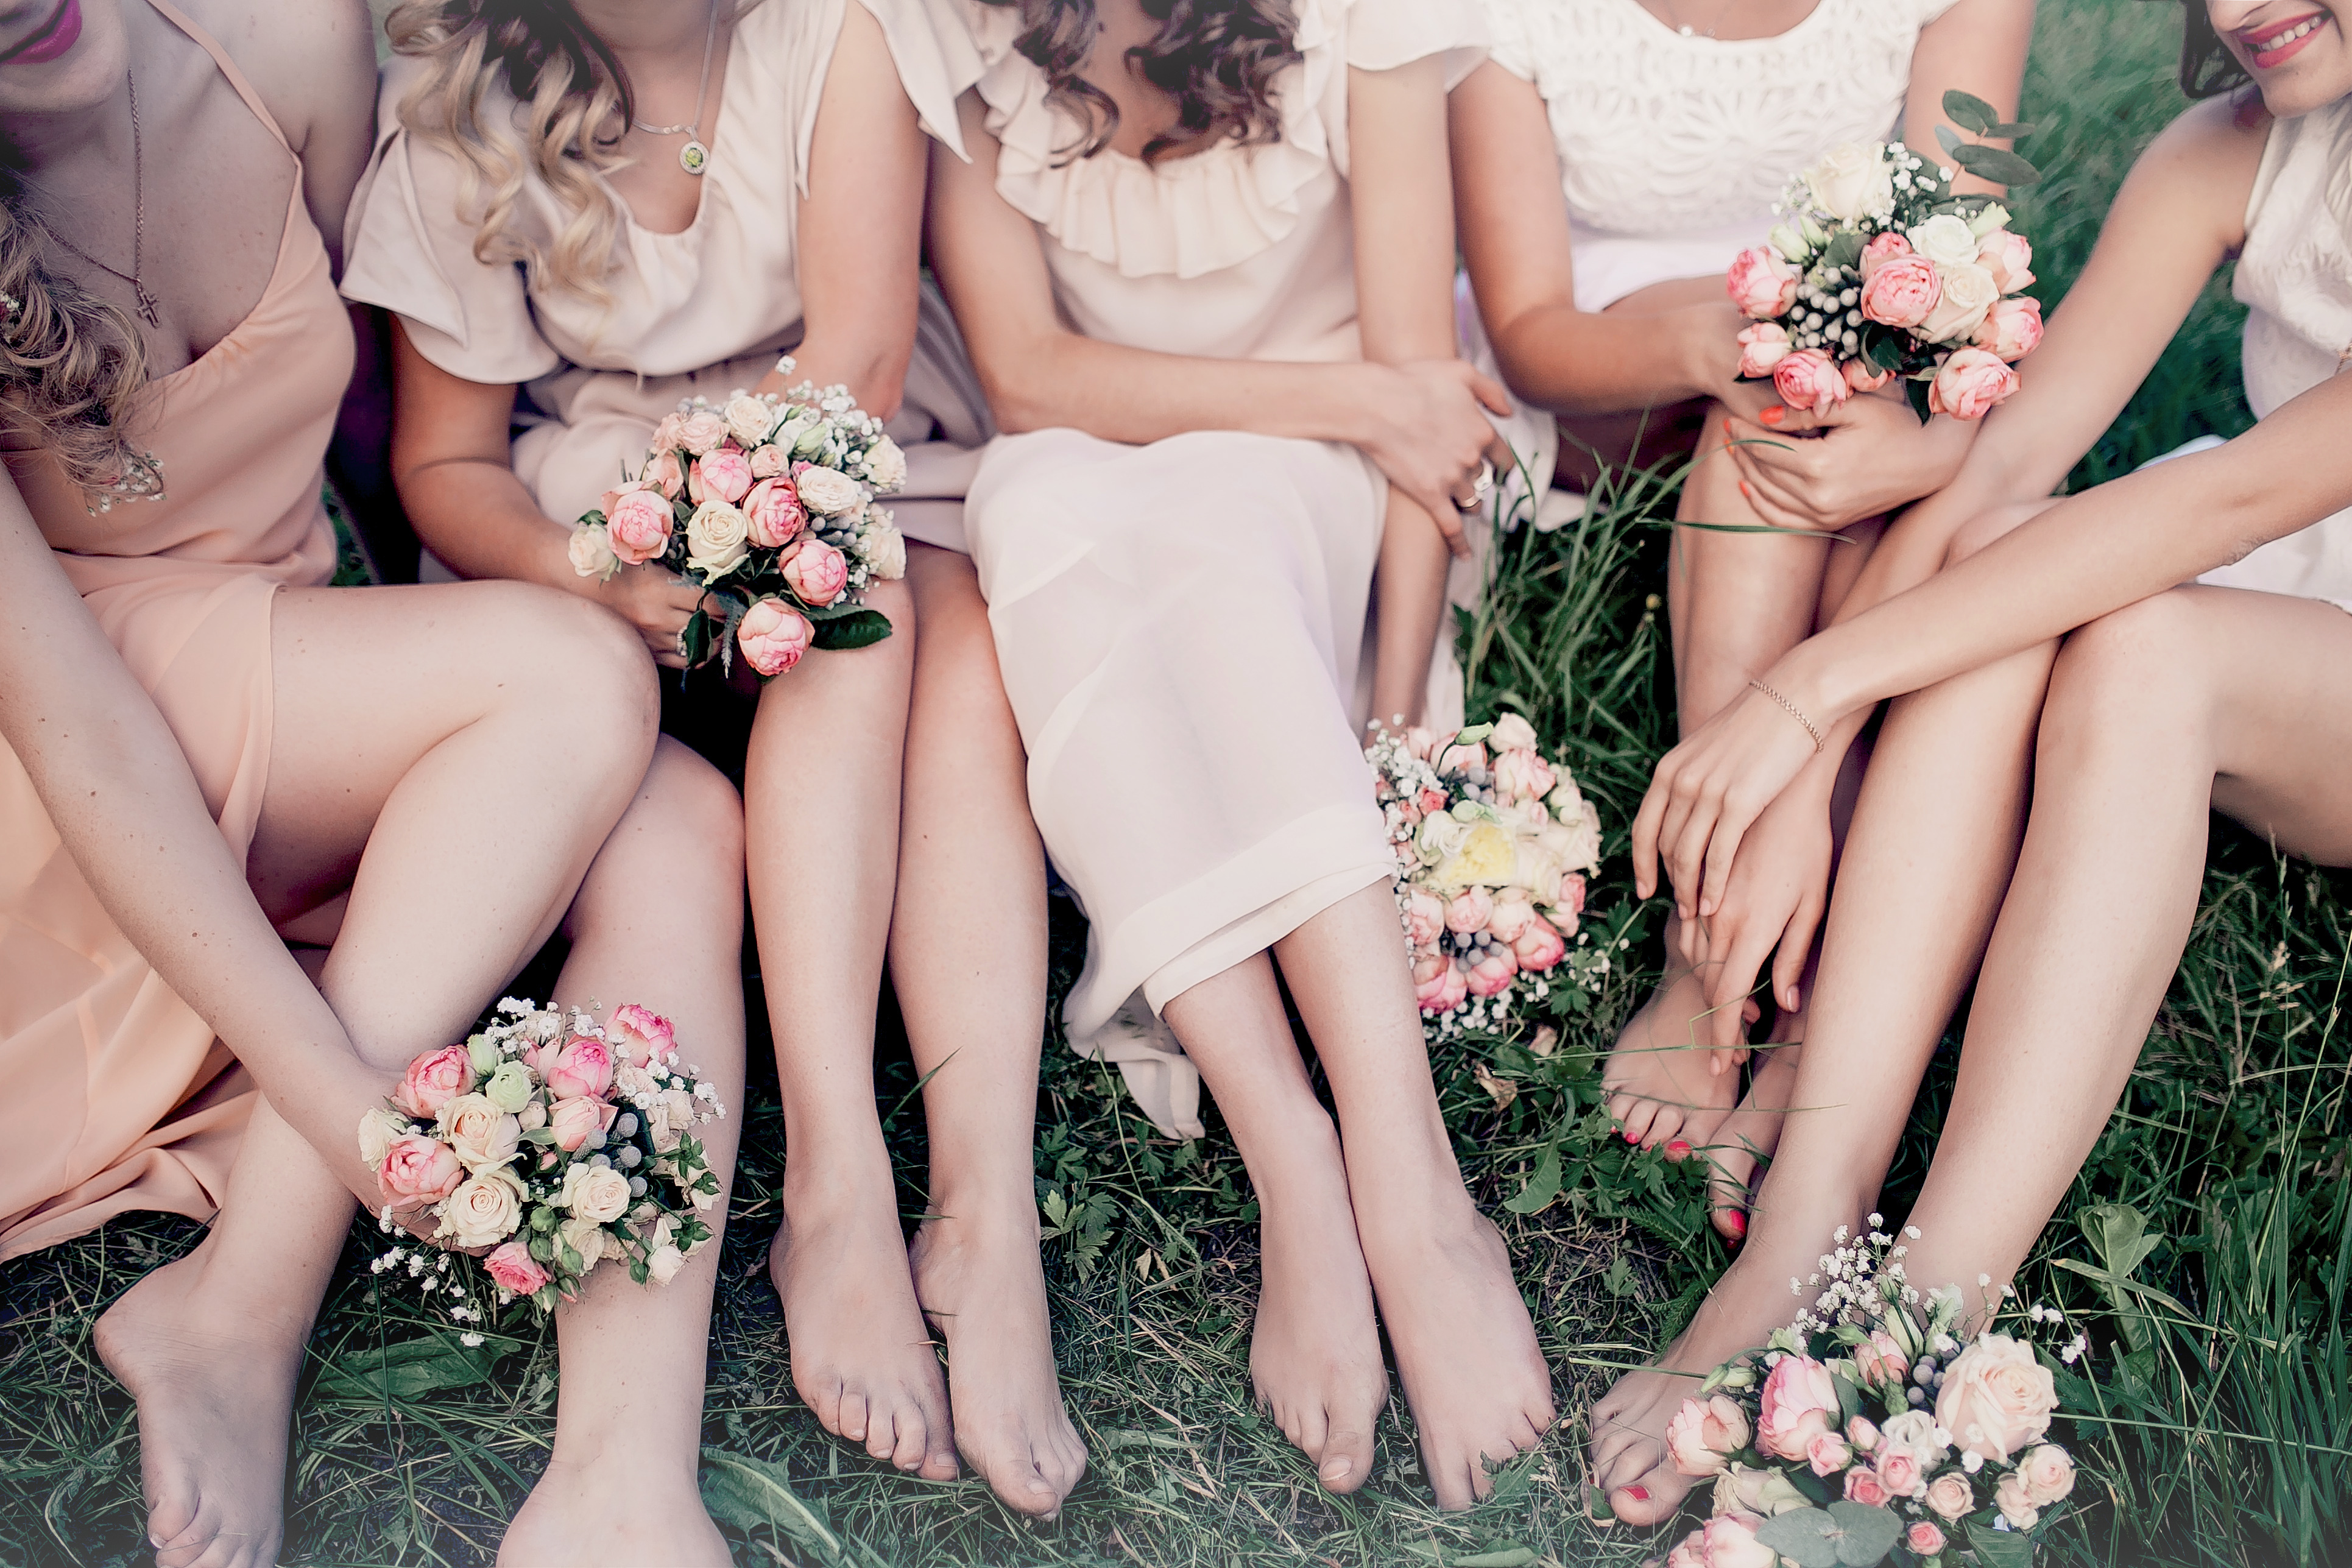 A bride and her bridesmaids | Source: Shutterstock